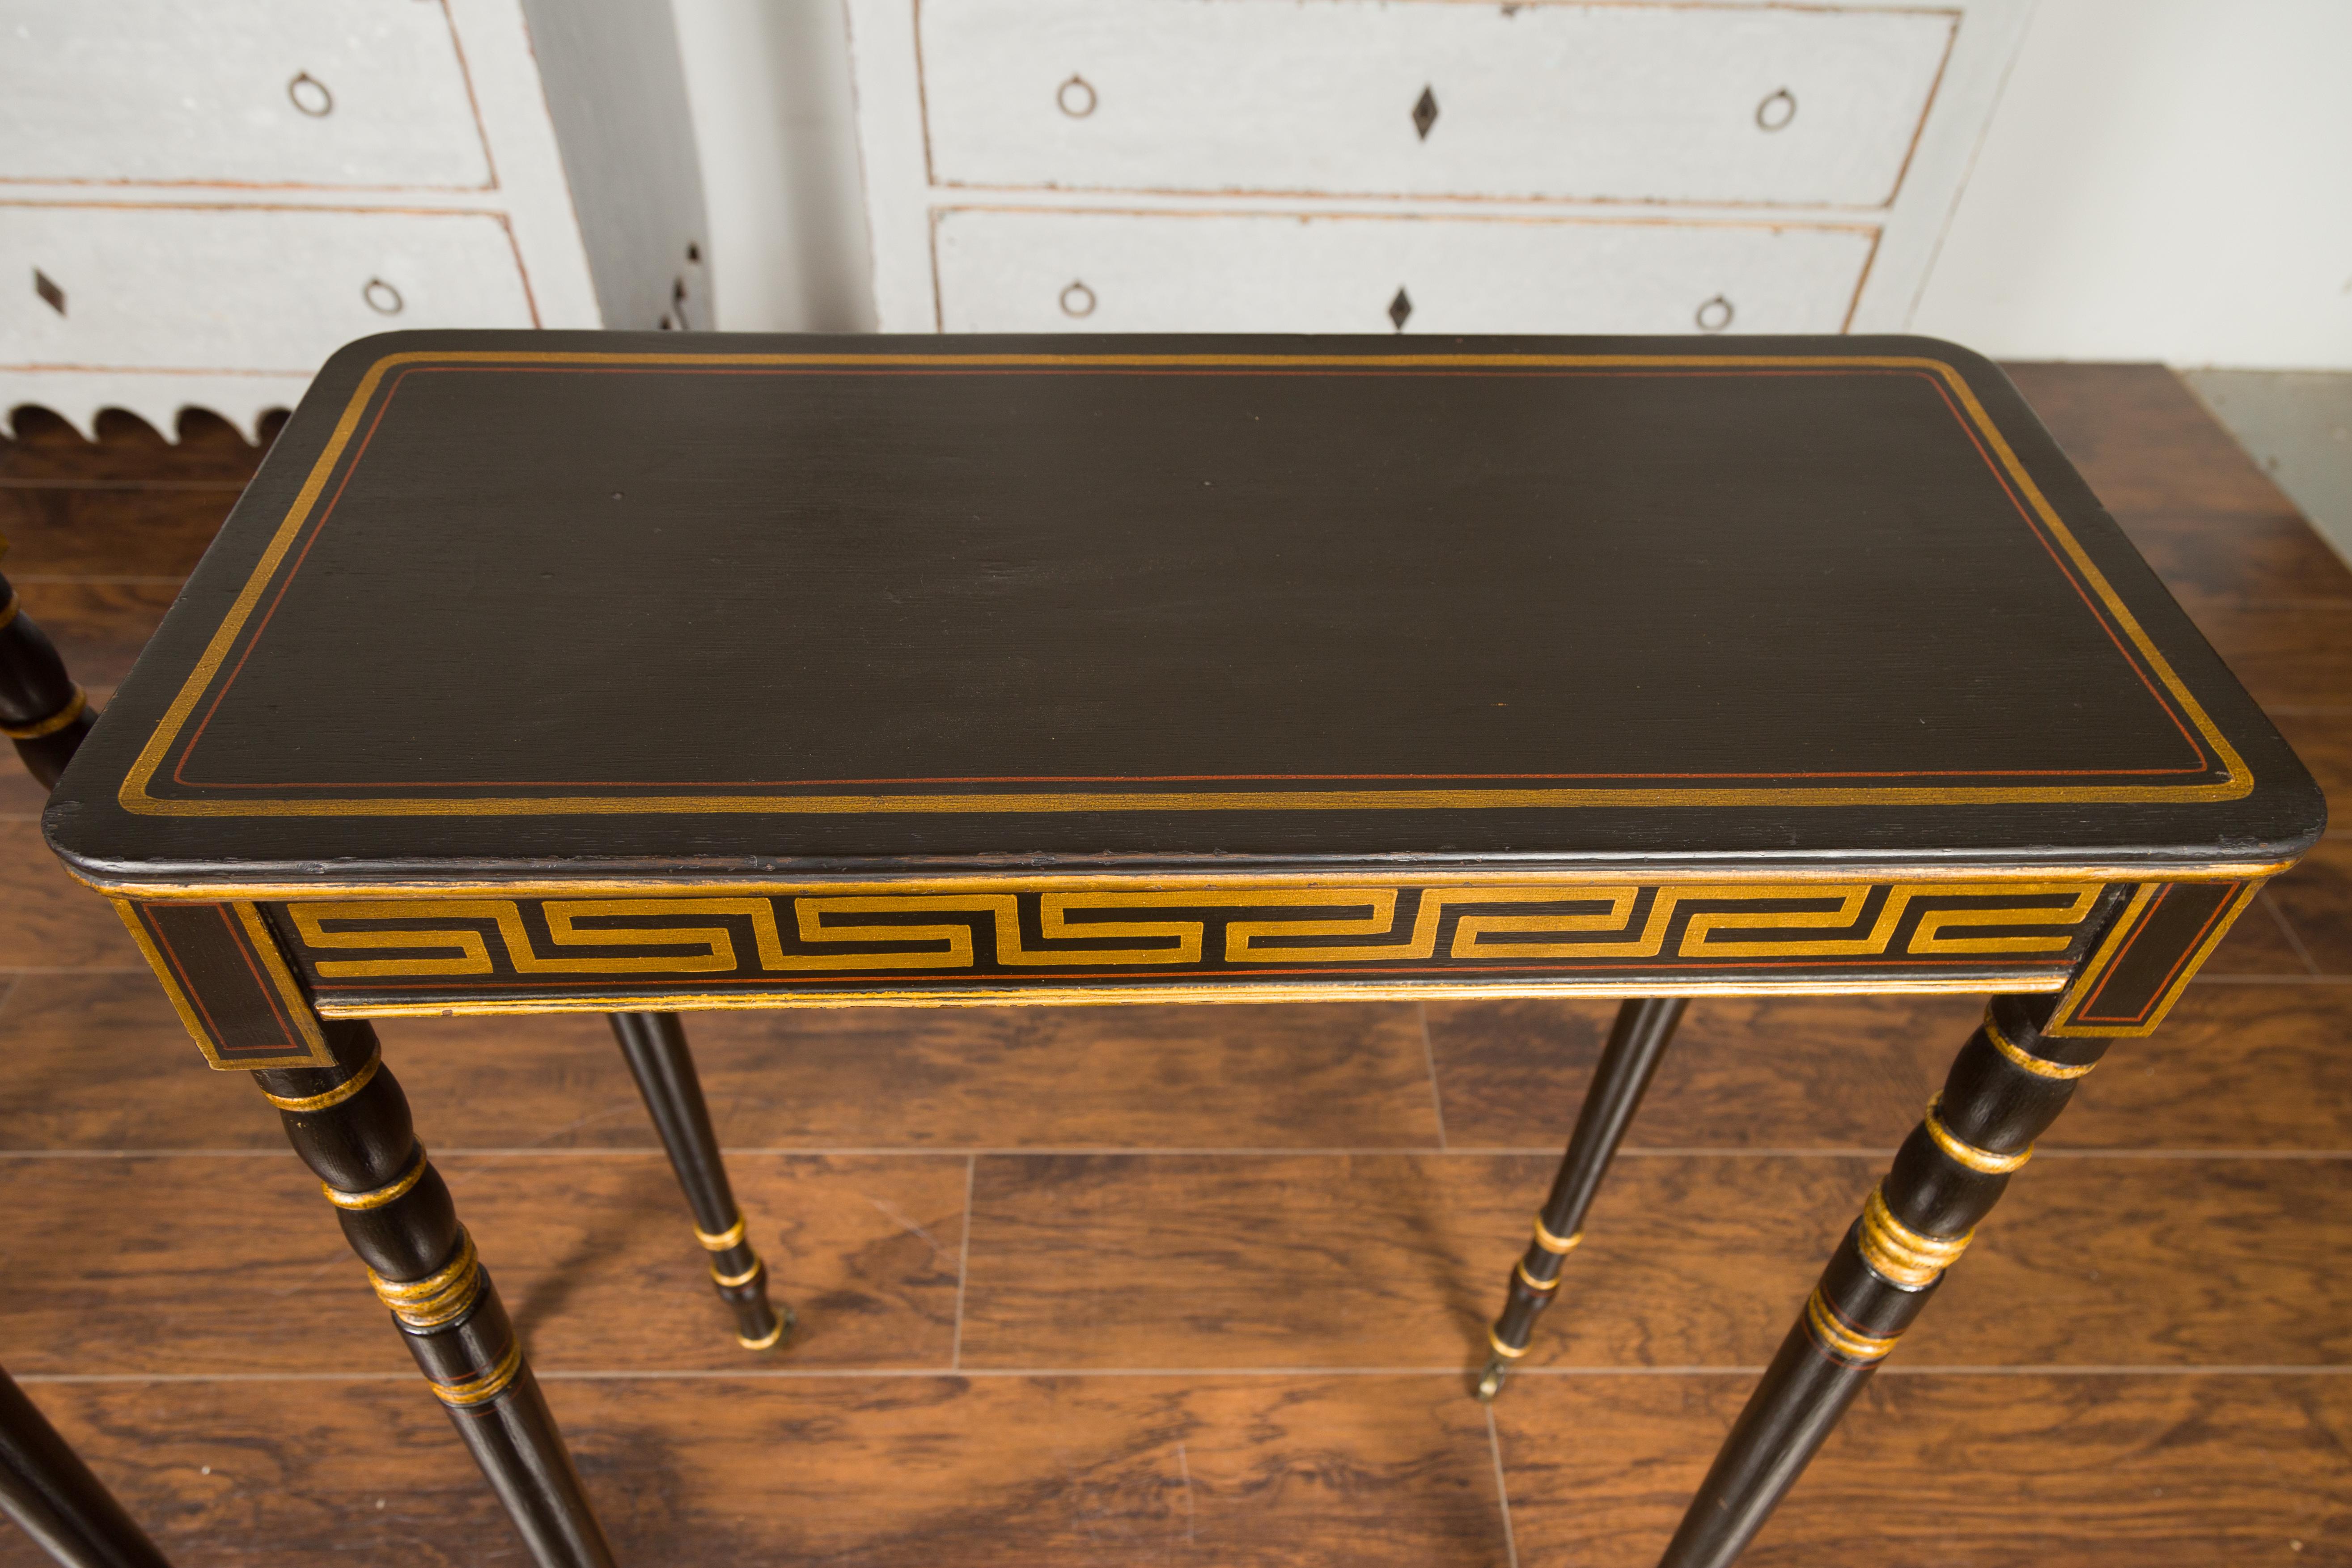 Pair of English Regency Period Ebonized Wood Console Tables with Gilt Greek Key For Sale 8